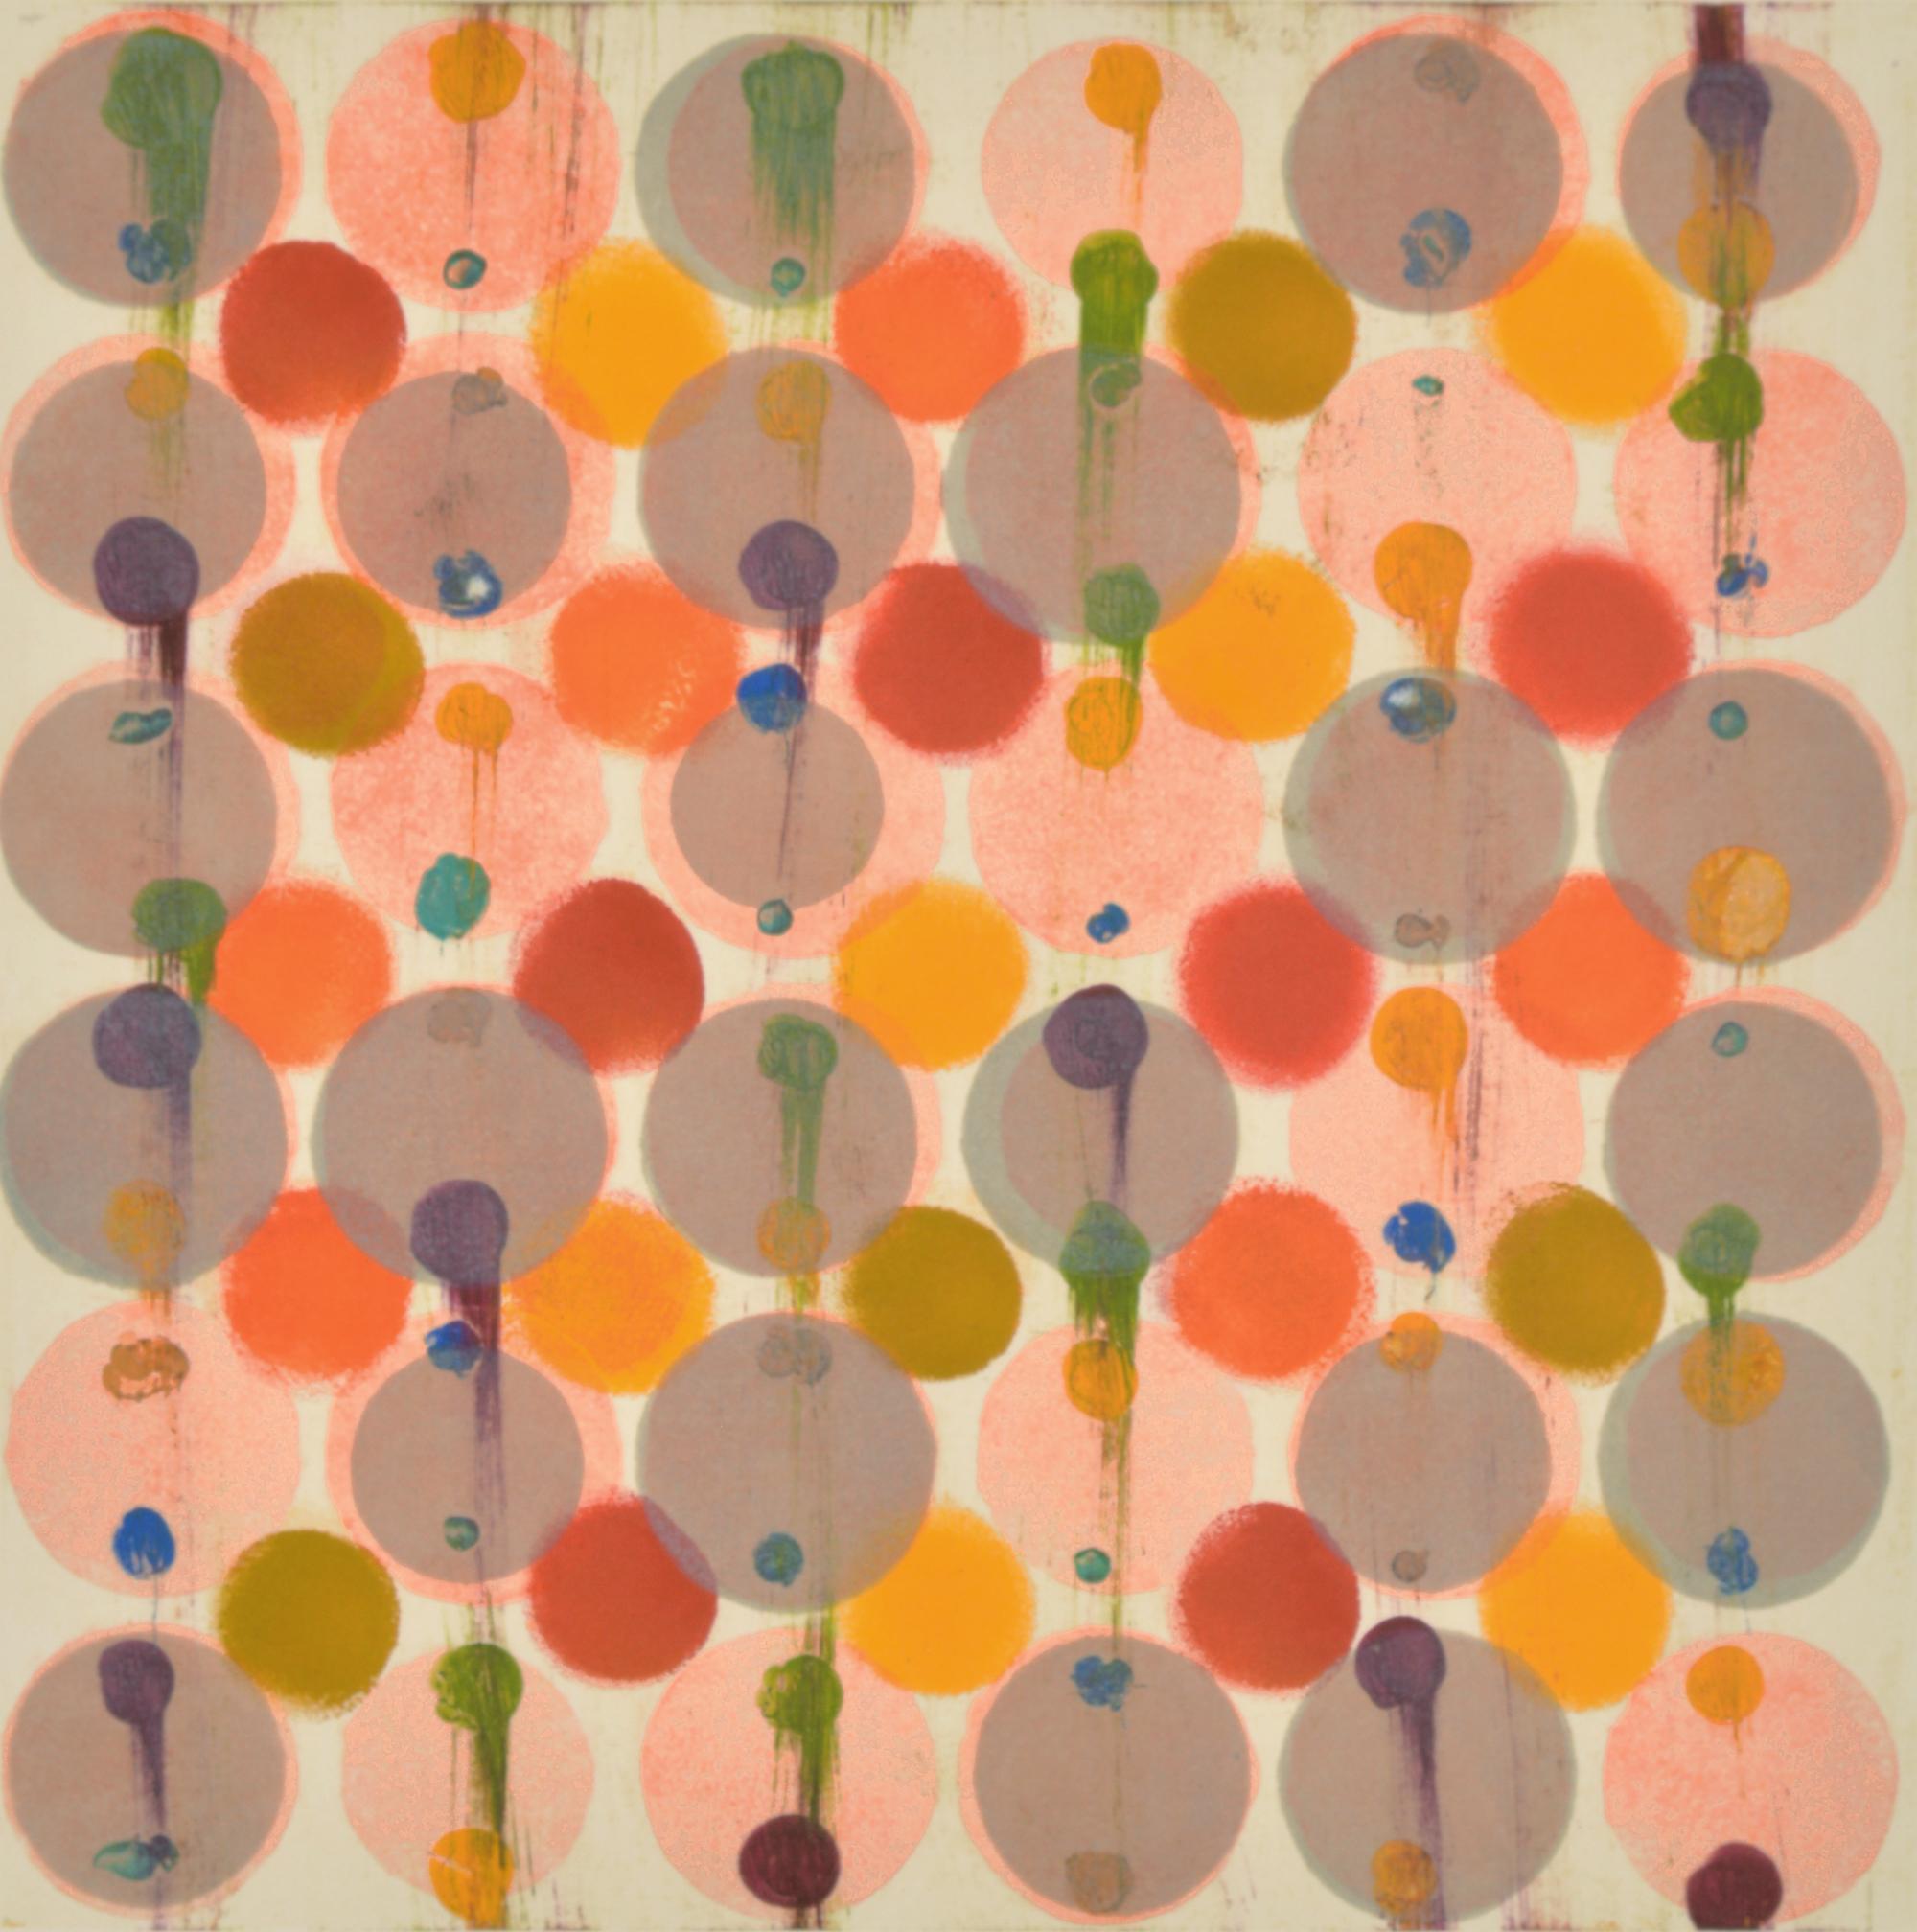 Janine Wong Abstract Print - "Dot Variant 26", color dots, abstract, pink, orange, red, green, yellow